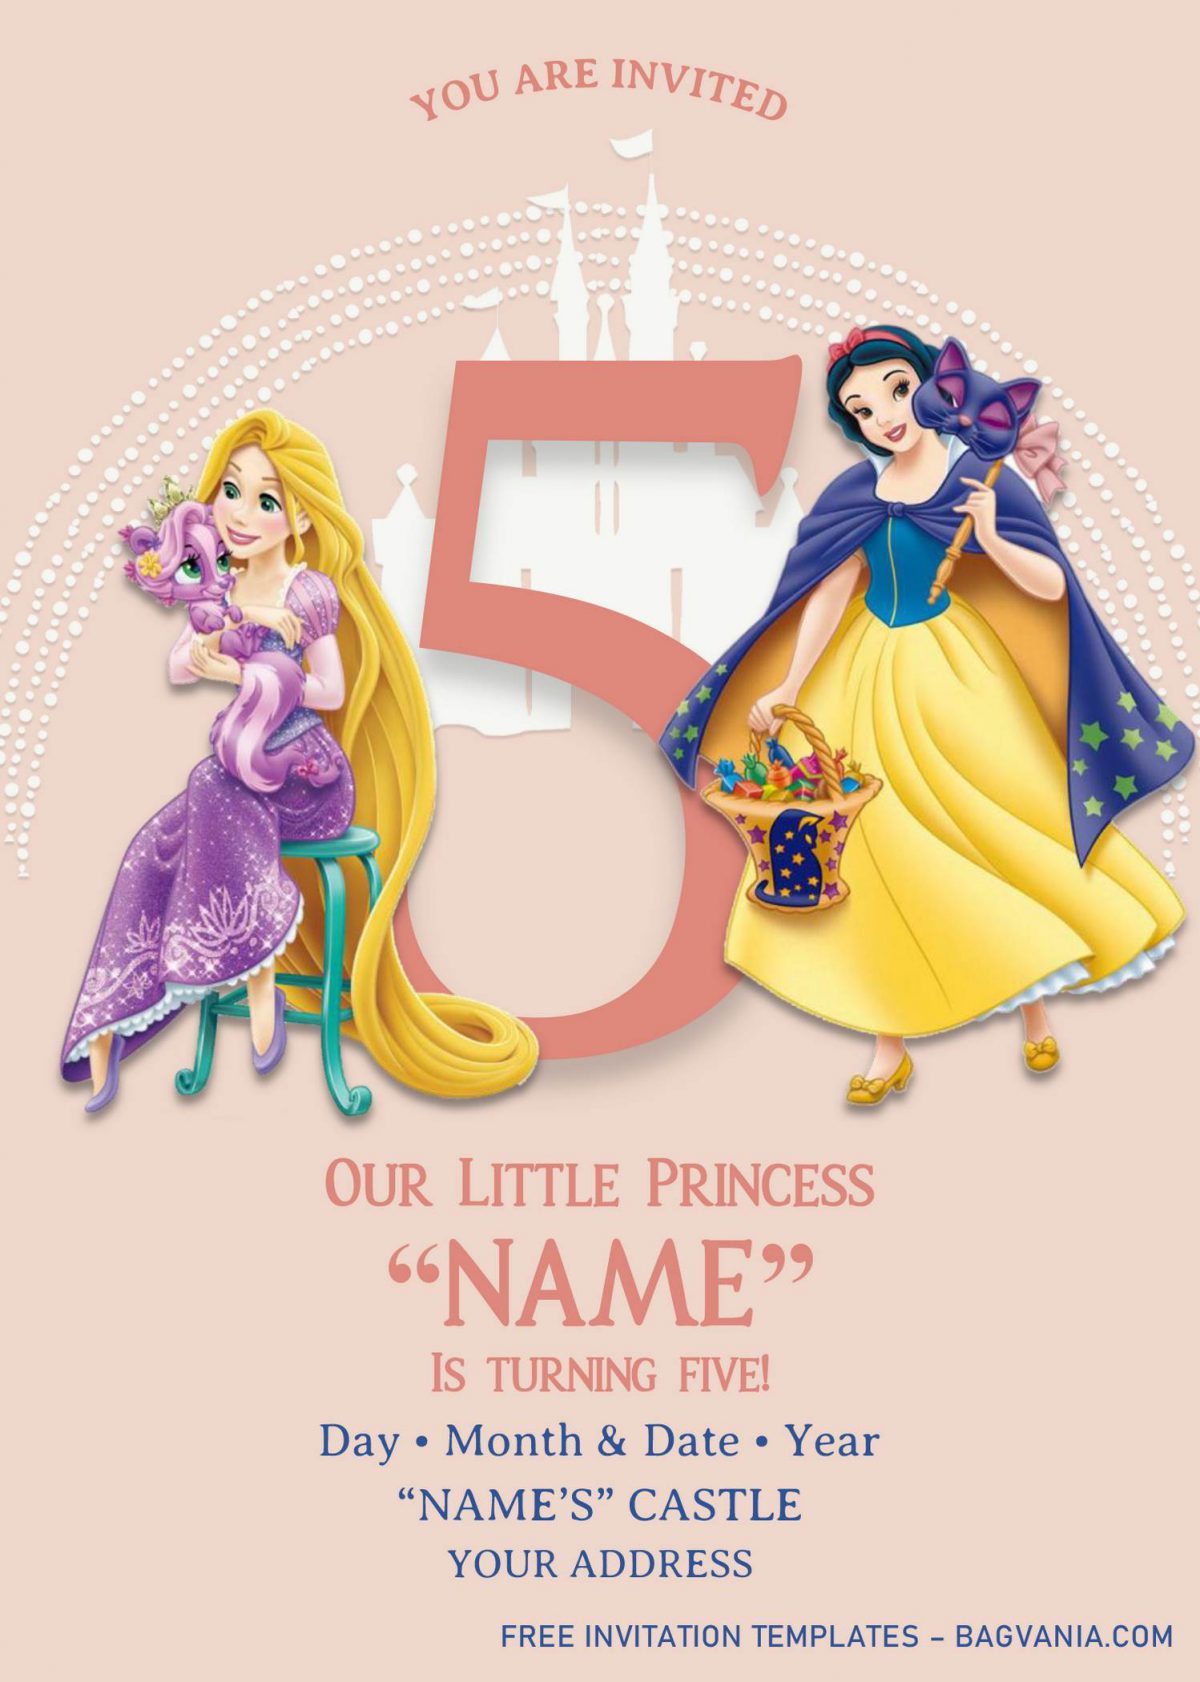 Disney Princess Birthday Invitation Templates - Editable With MS Word and has snow white and rapunzel